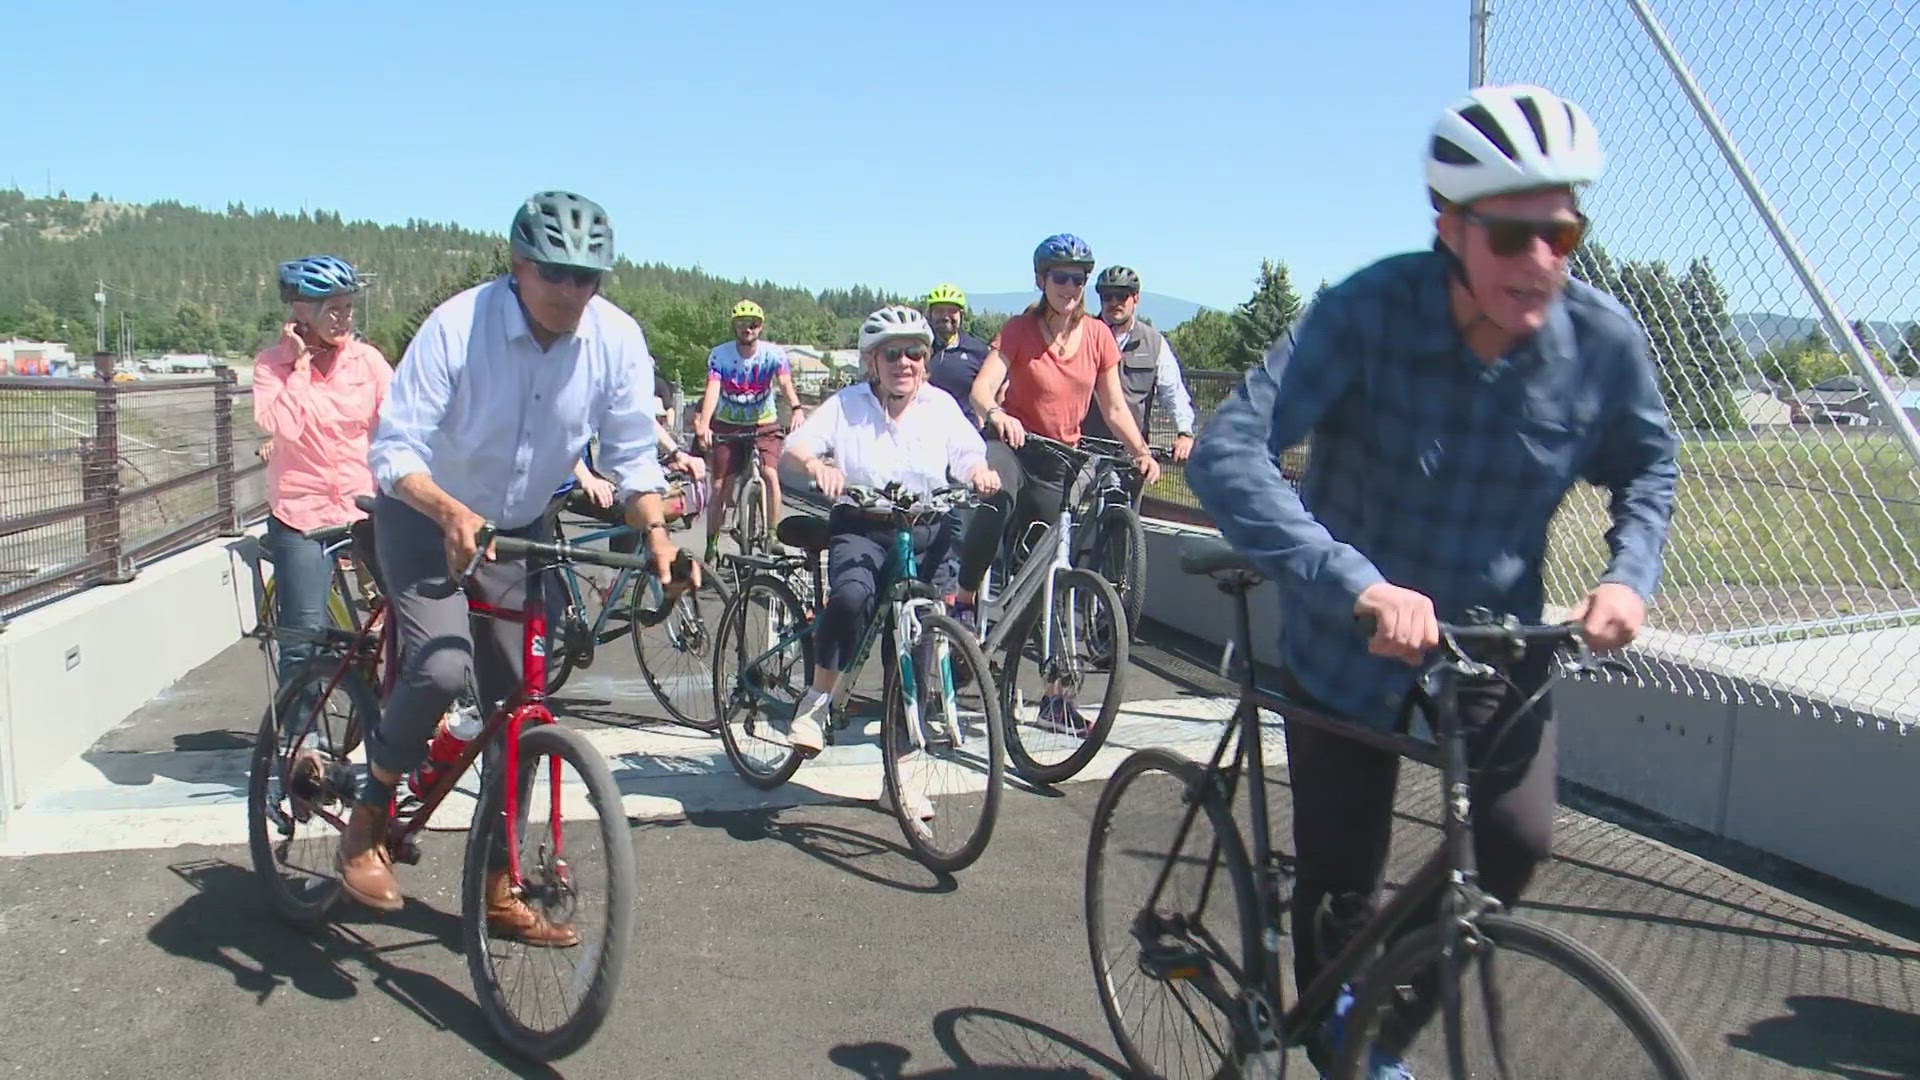 Community members, WSDOT leaders, and Governor Jay Inslee cut the ribbon on the new section of Children of the Sun Trail Friday.